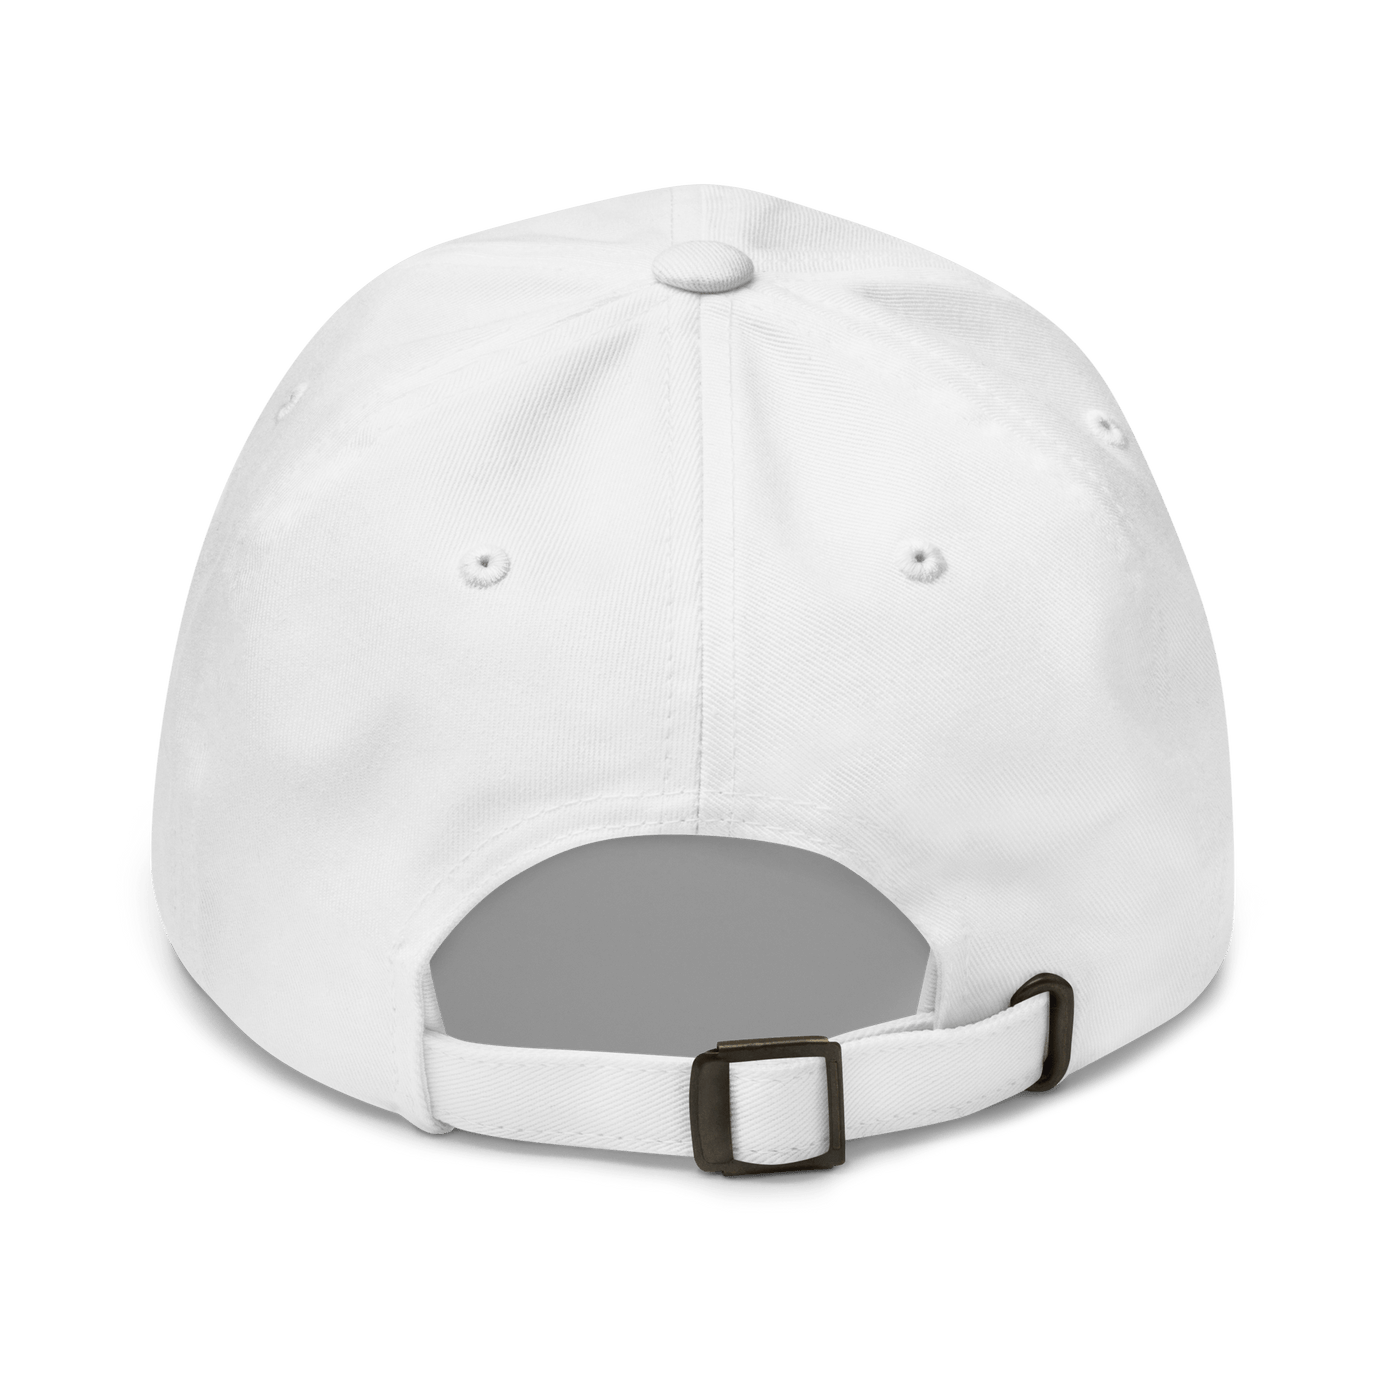 Shit Show Supervisor Dad hat - White - Just Another Cap Store